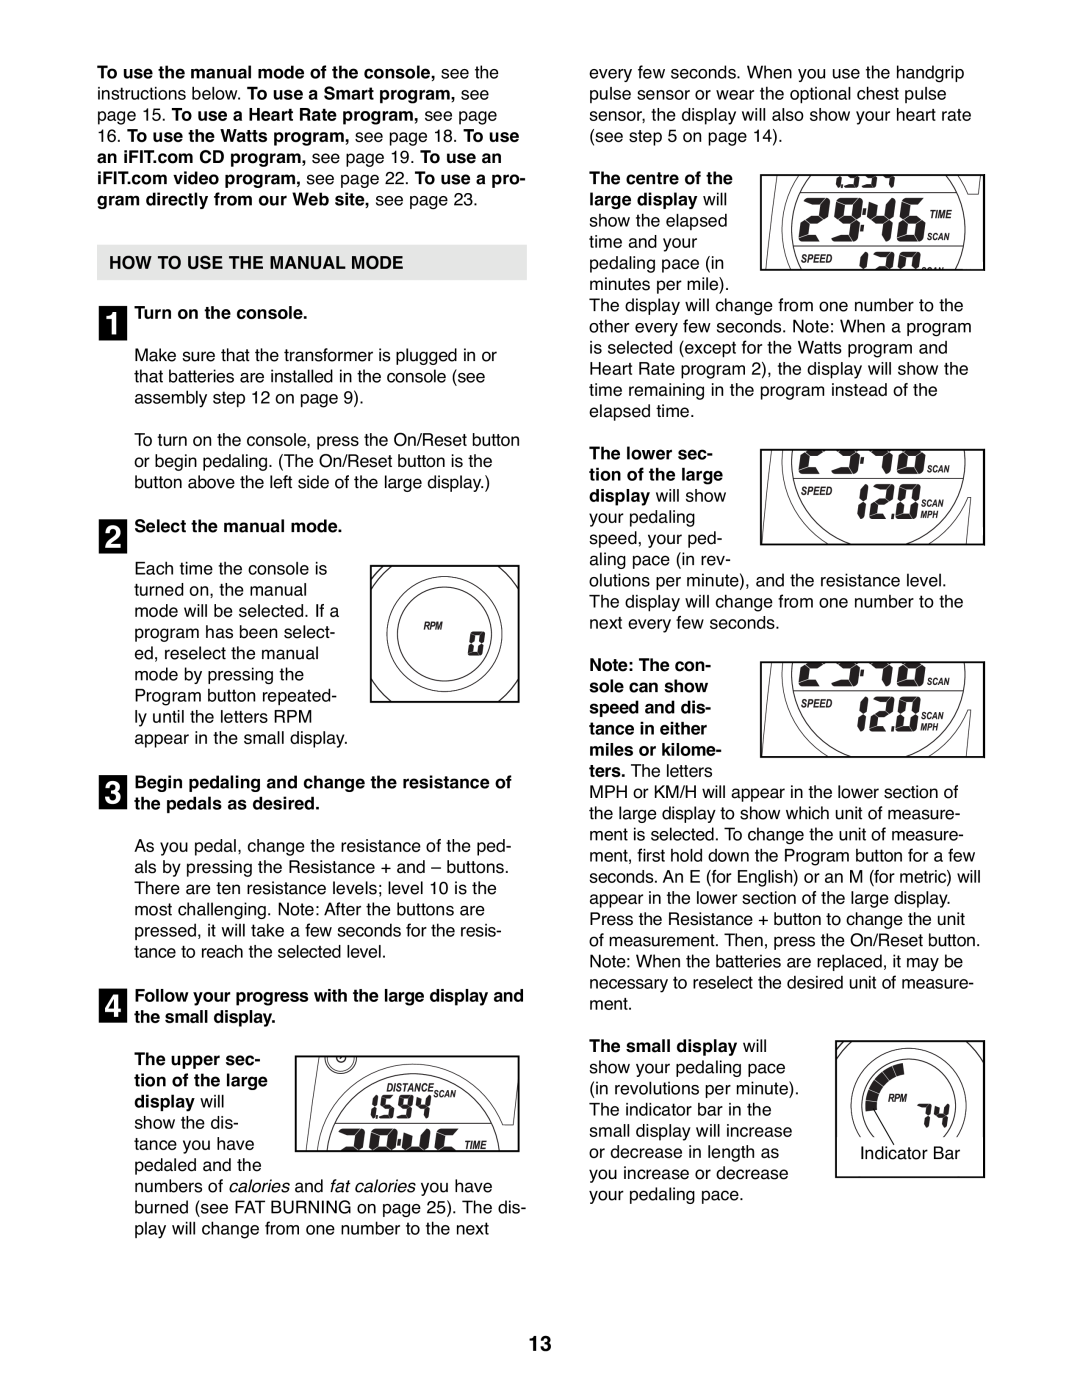 ProForm PFEVEX62832 user manual HOW TO USE THE MANUAL MODE 1 Turn on the console 